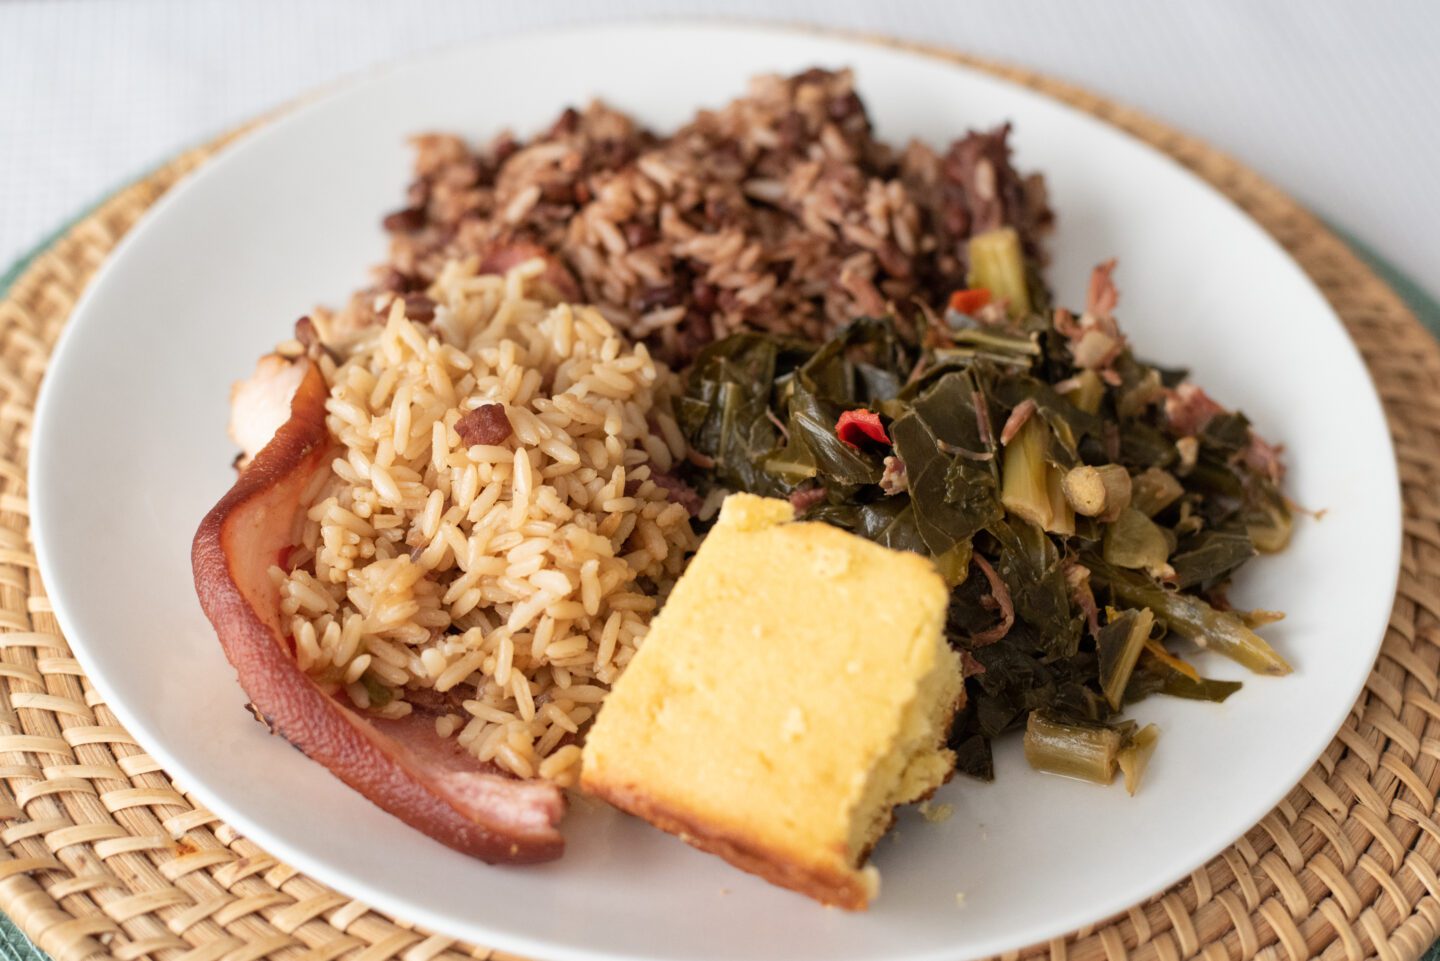 Gullah Food Brands to Inspire Your Holiday Food